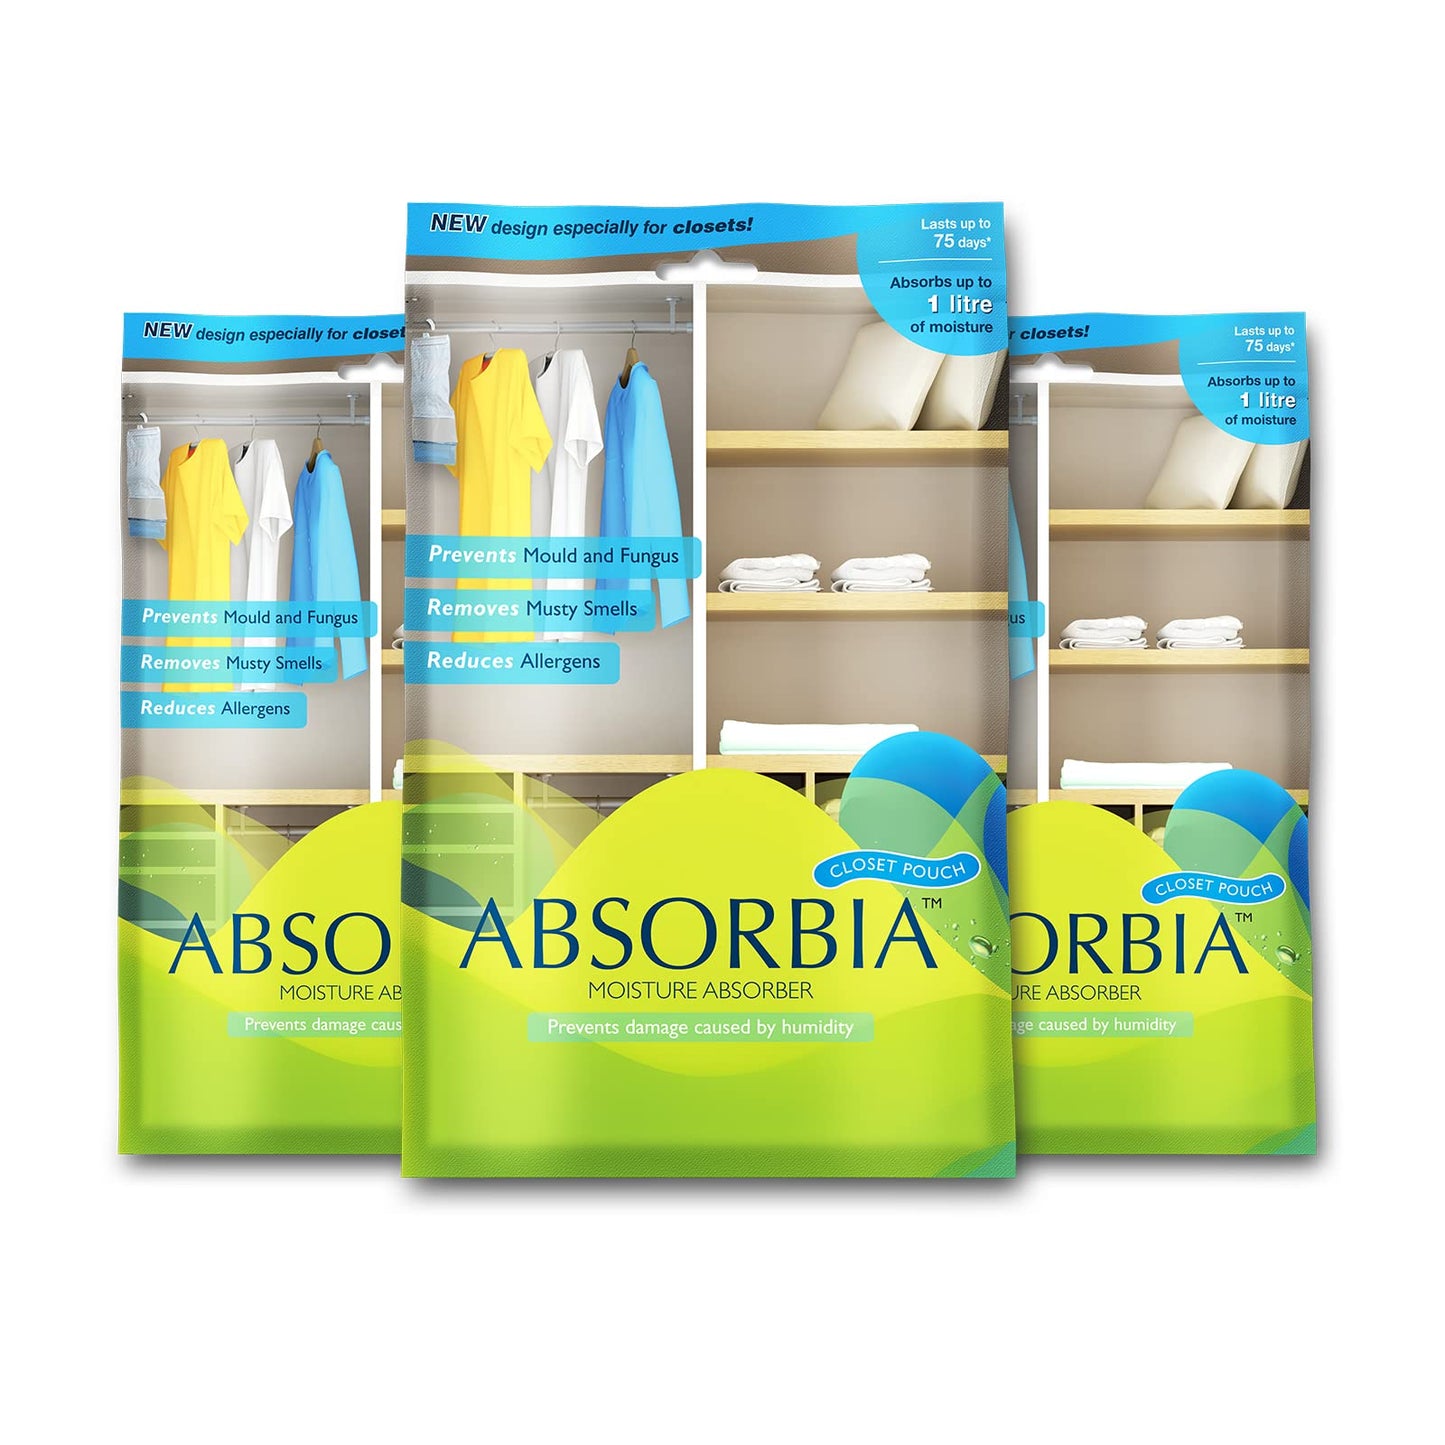 Absorbia Hanging Pouch - Family Pack of 3(440g) |Absorbs 1ltr Each